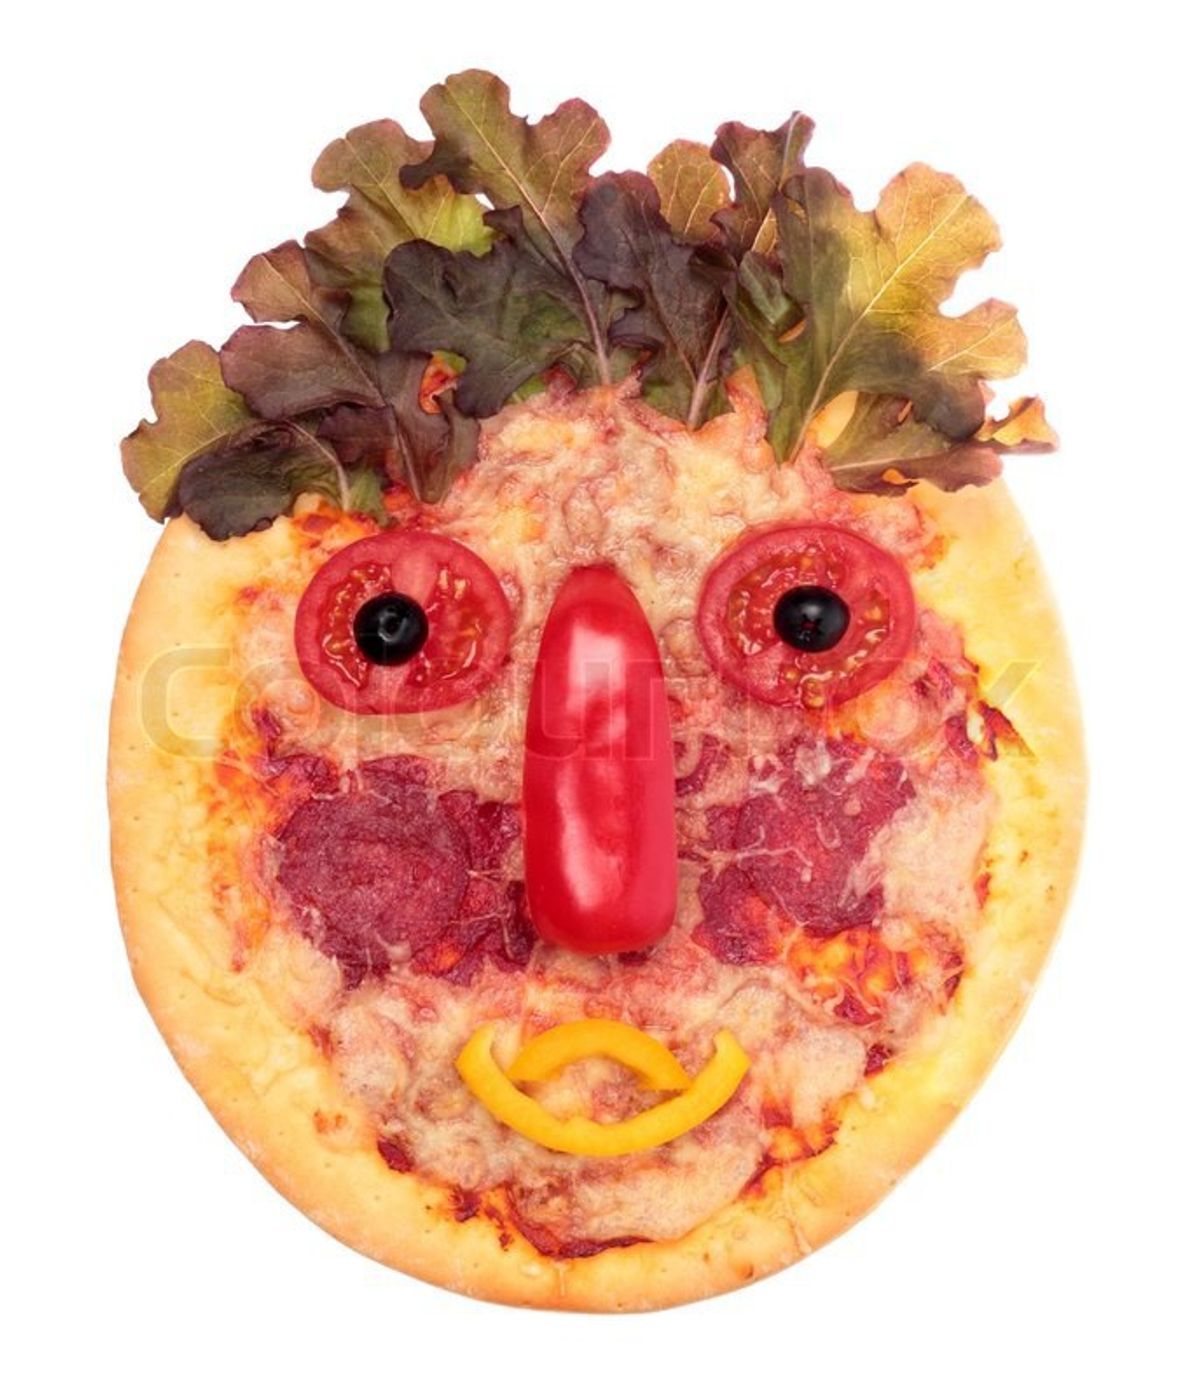 Apparently I'm A Pizza Face